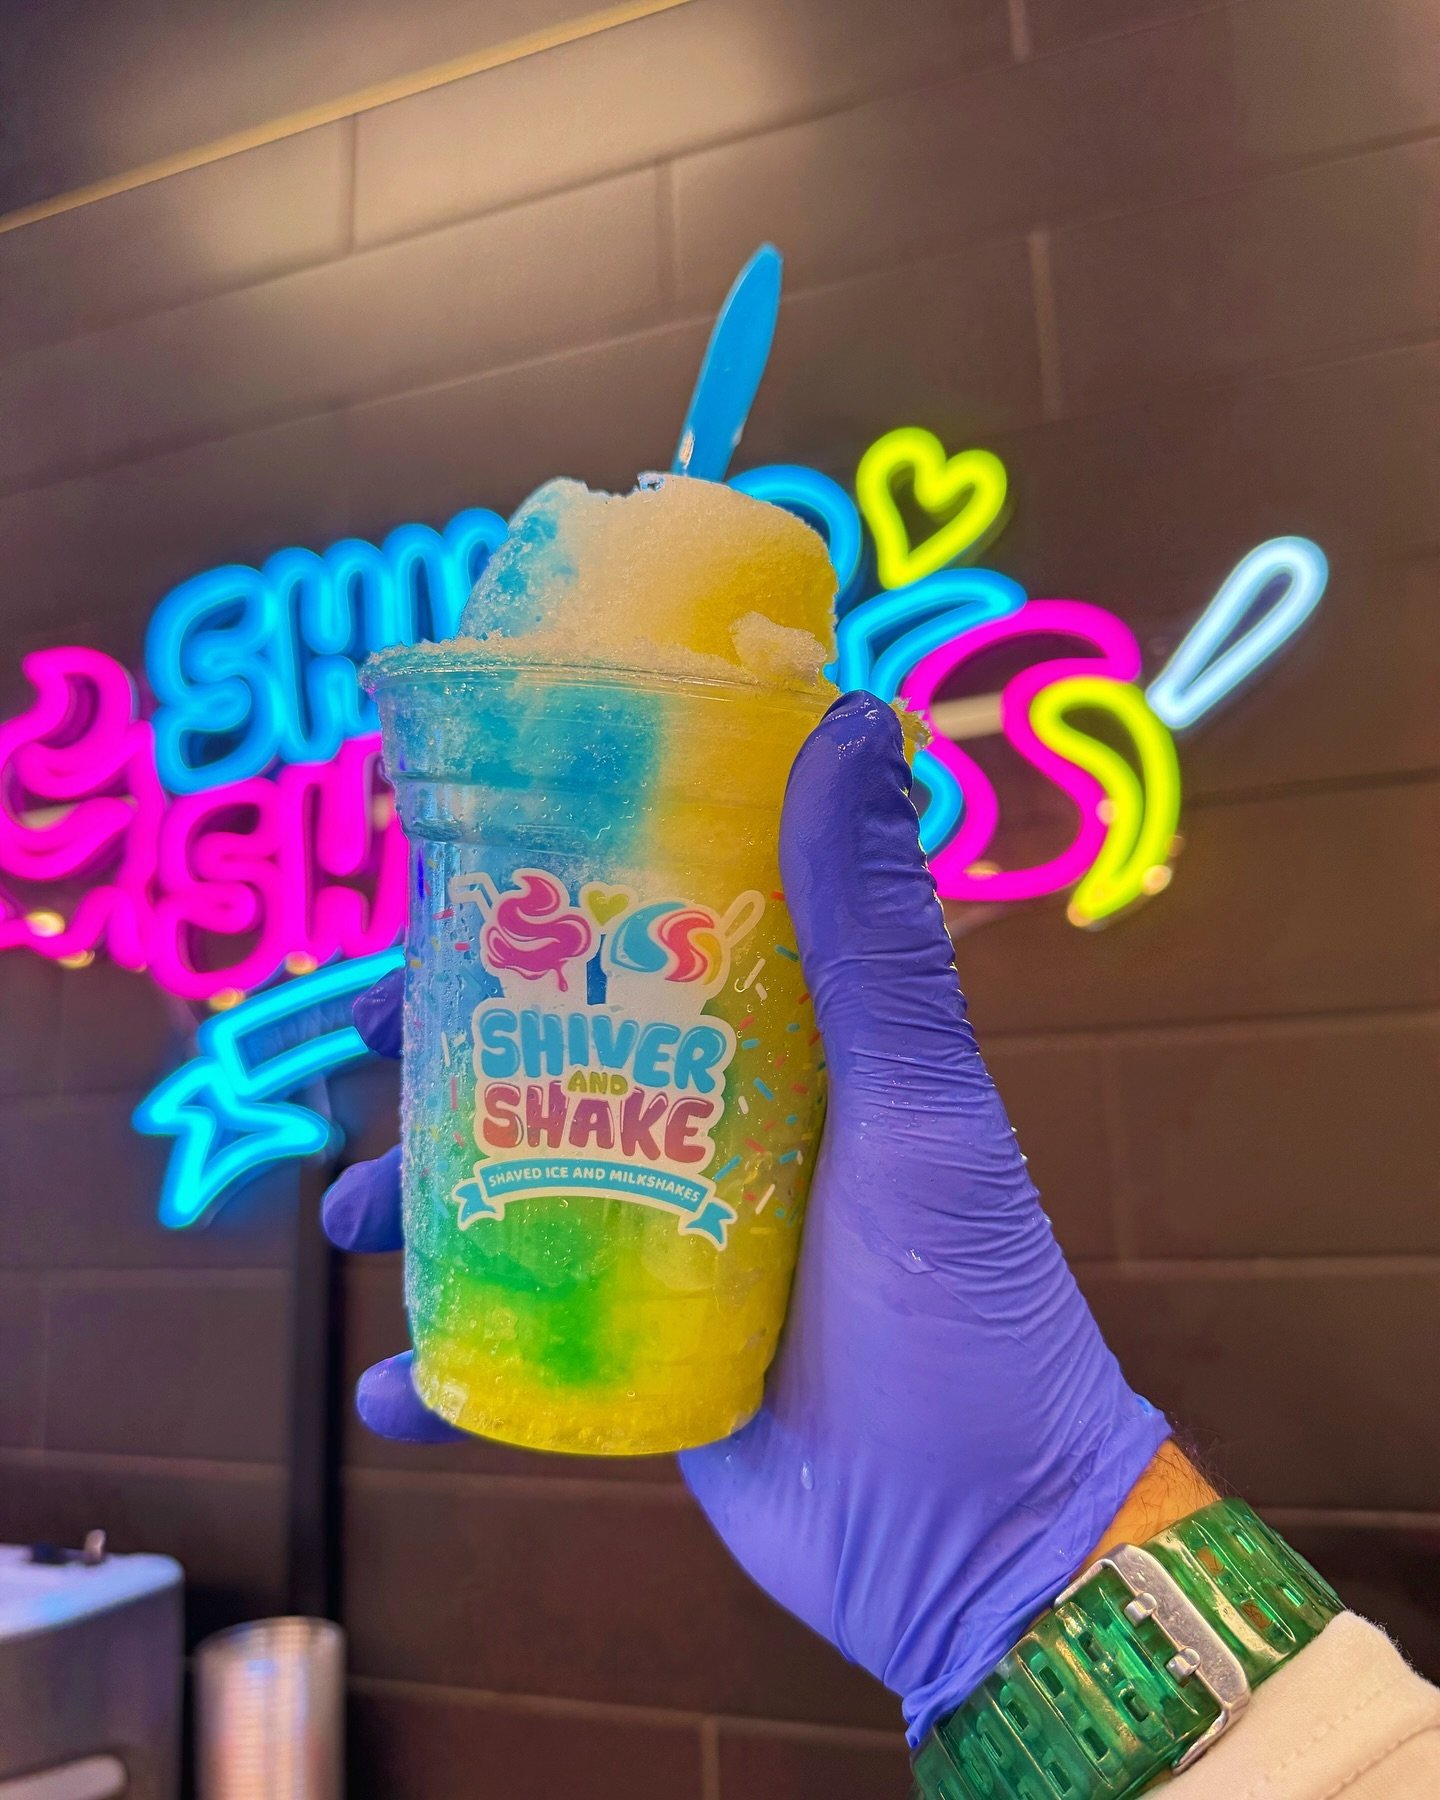 Who&rsquo;s ready to give this one a try? This is a tropical blend of Blue Raz, Coconut, and Pi&ntilde;a Colada! 😍

Our top three names for this creation are:

A. Beach Bum
B. Summer Bliss
C. Beach Side Vibes

Which one should we go with? Let us kno